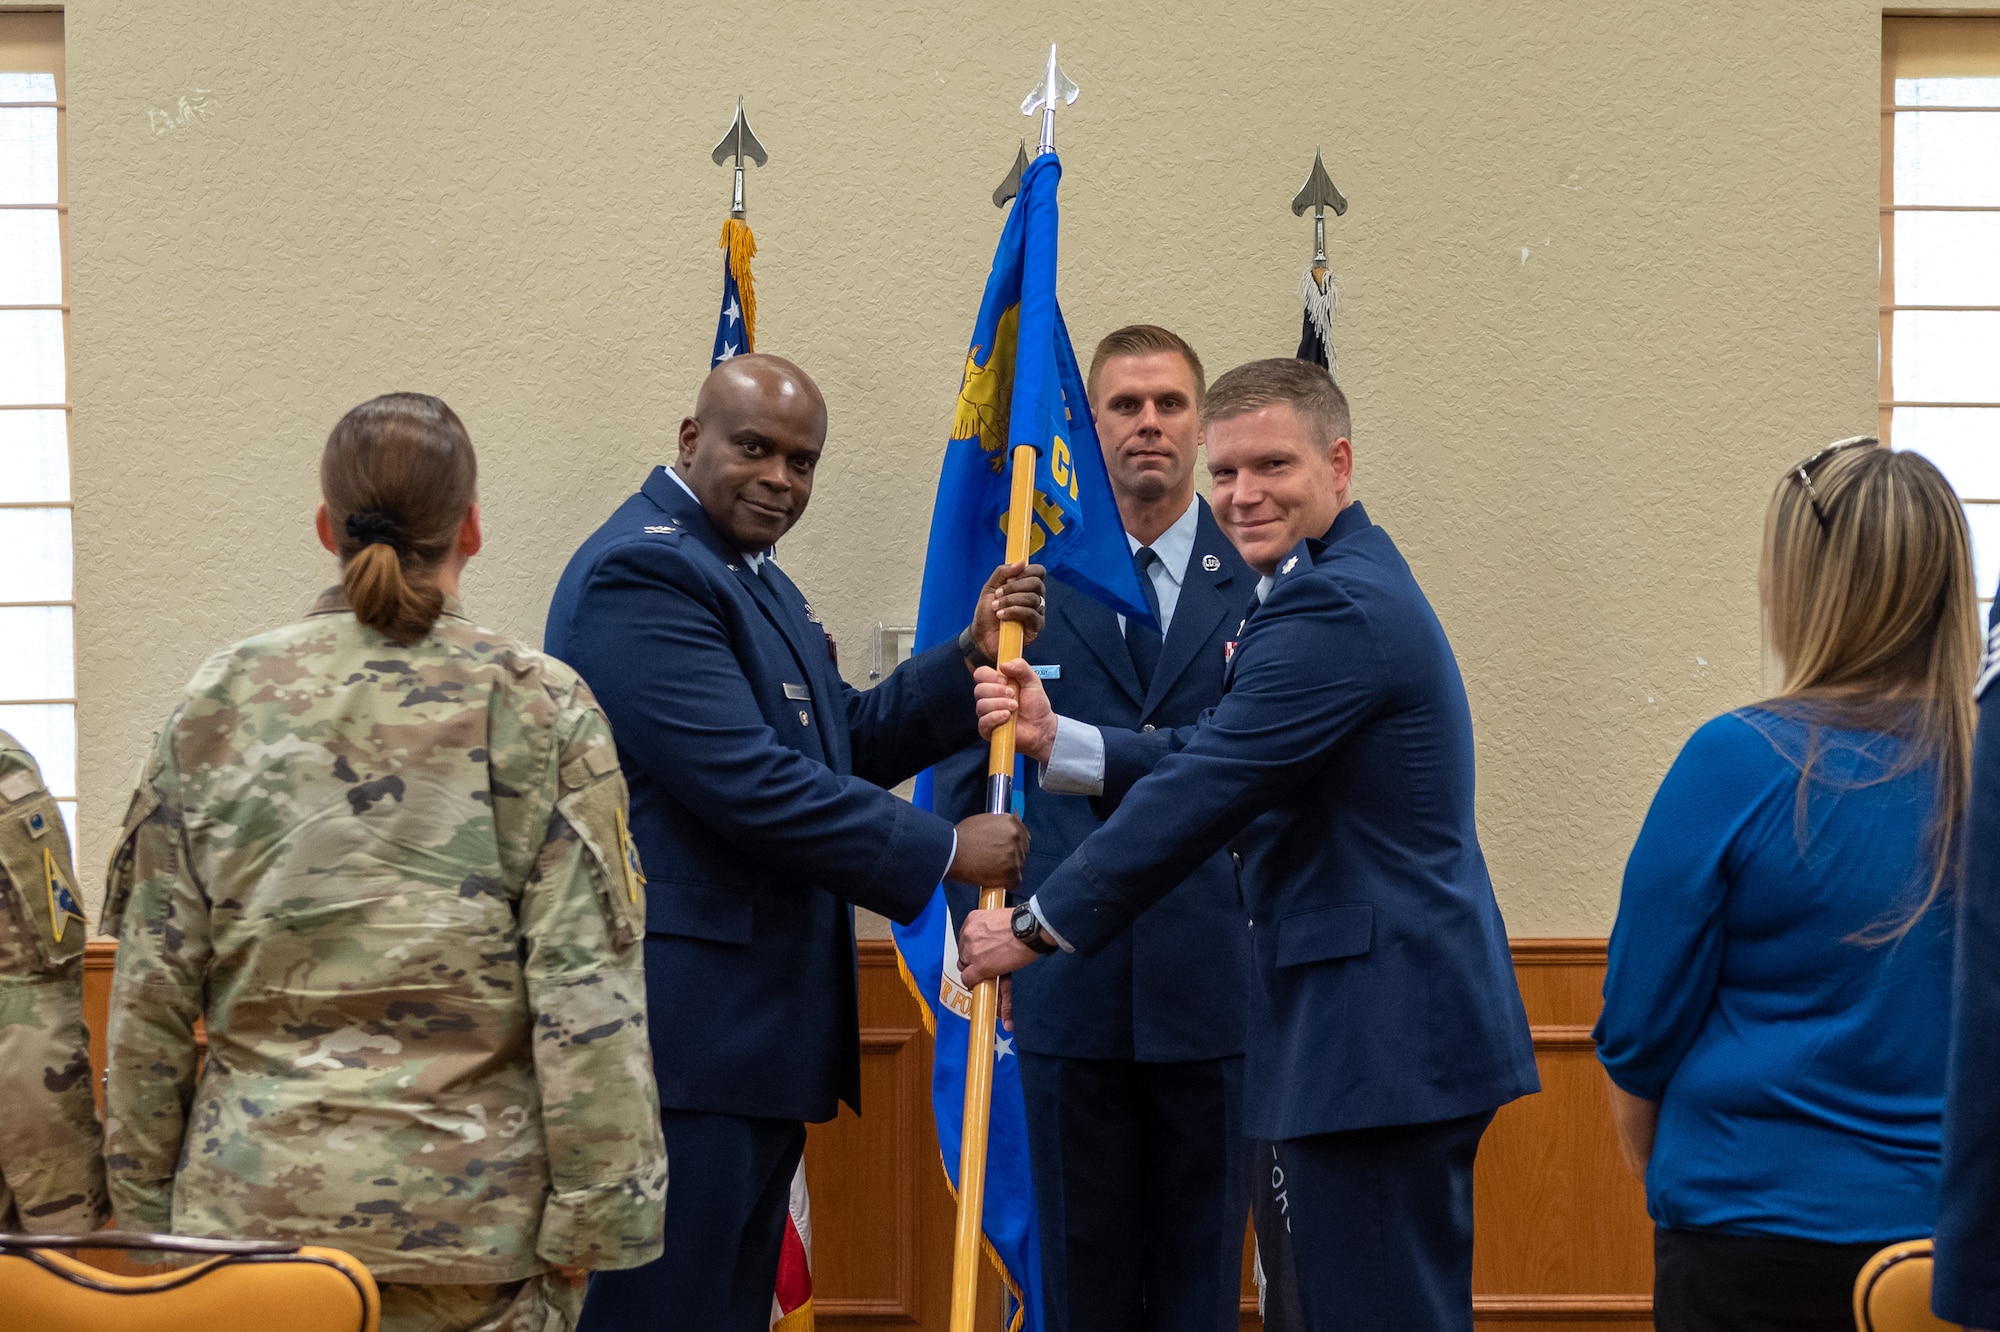 U.S. Space Force Lt. Col. Garrett Duff takes command of the 45th Comptroller Squadron at Patrick Space Force Base, Florida, June 23, 2023. Duff is replacing Lt. Col. Jeremy Williams as commander. (U.S. Space Force photo by Deanna Murano)